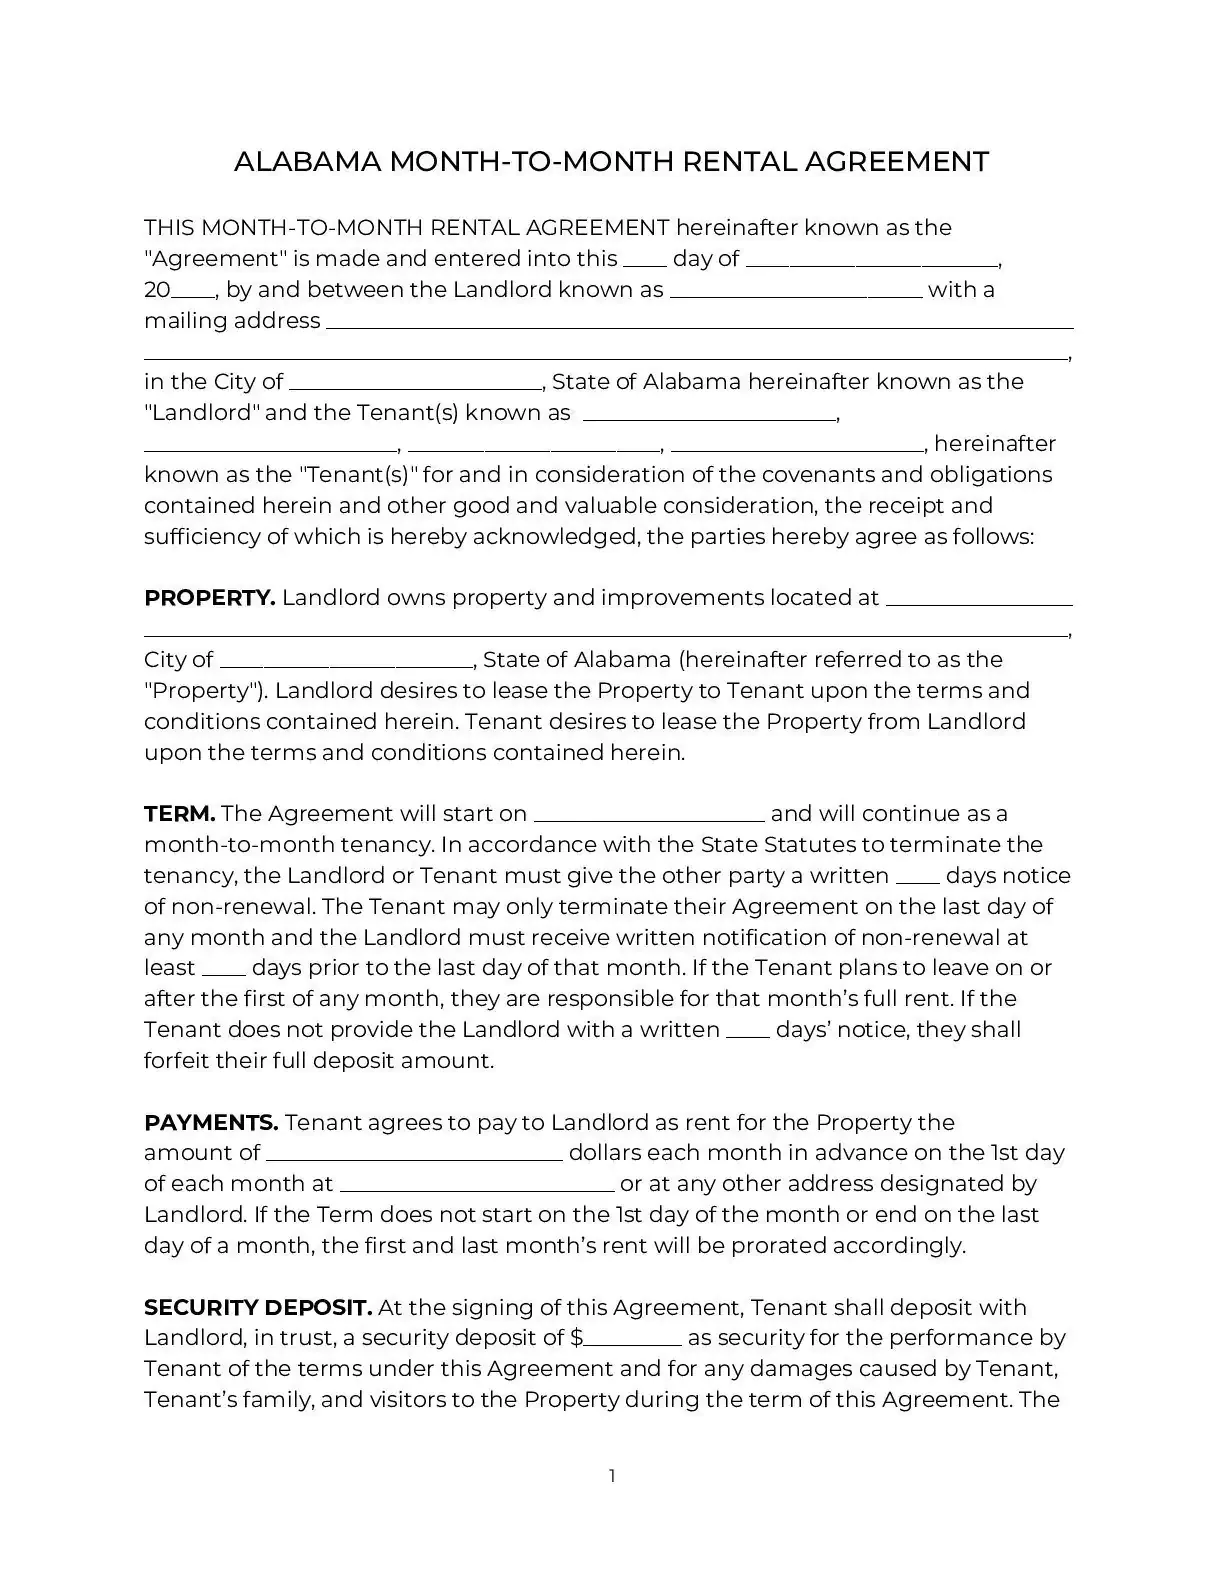 official alabama month to month rental agreement 2021 pdf form